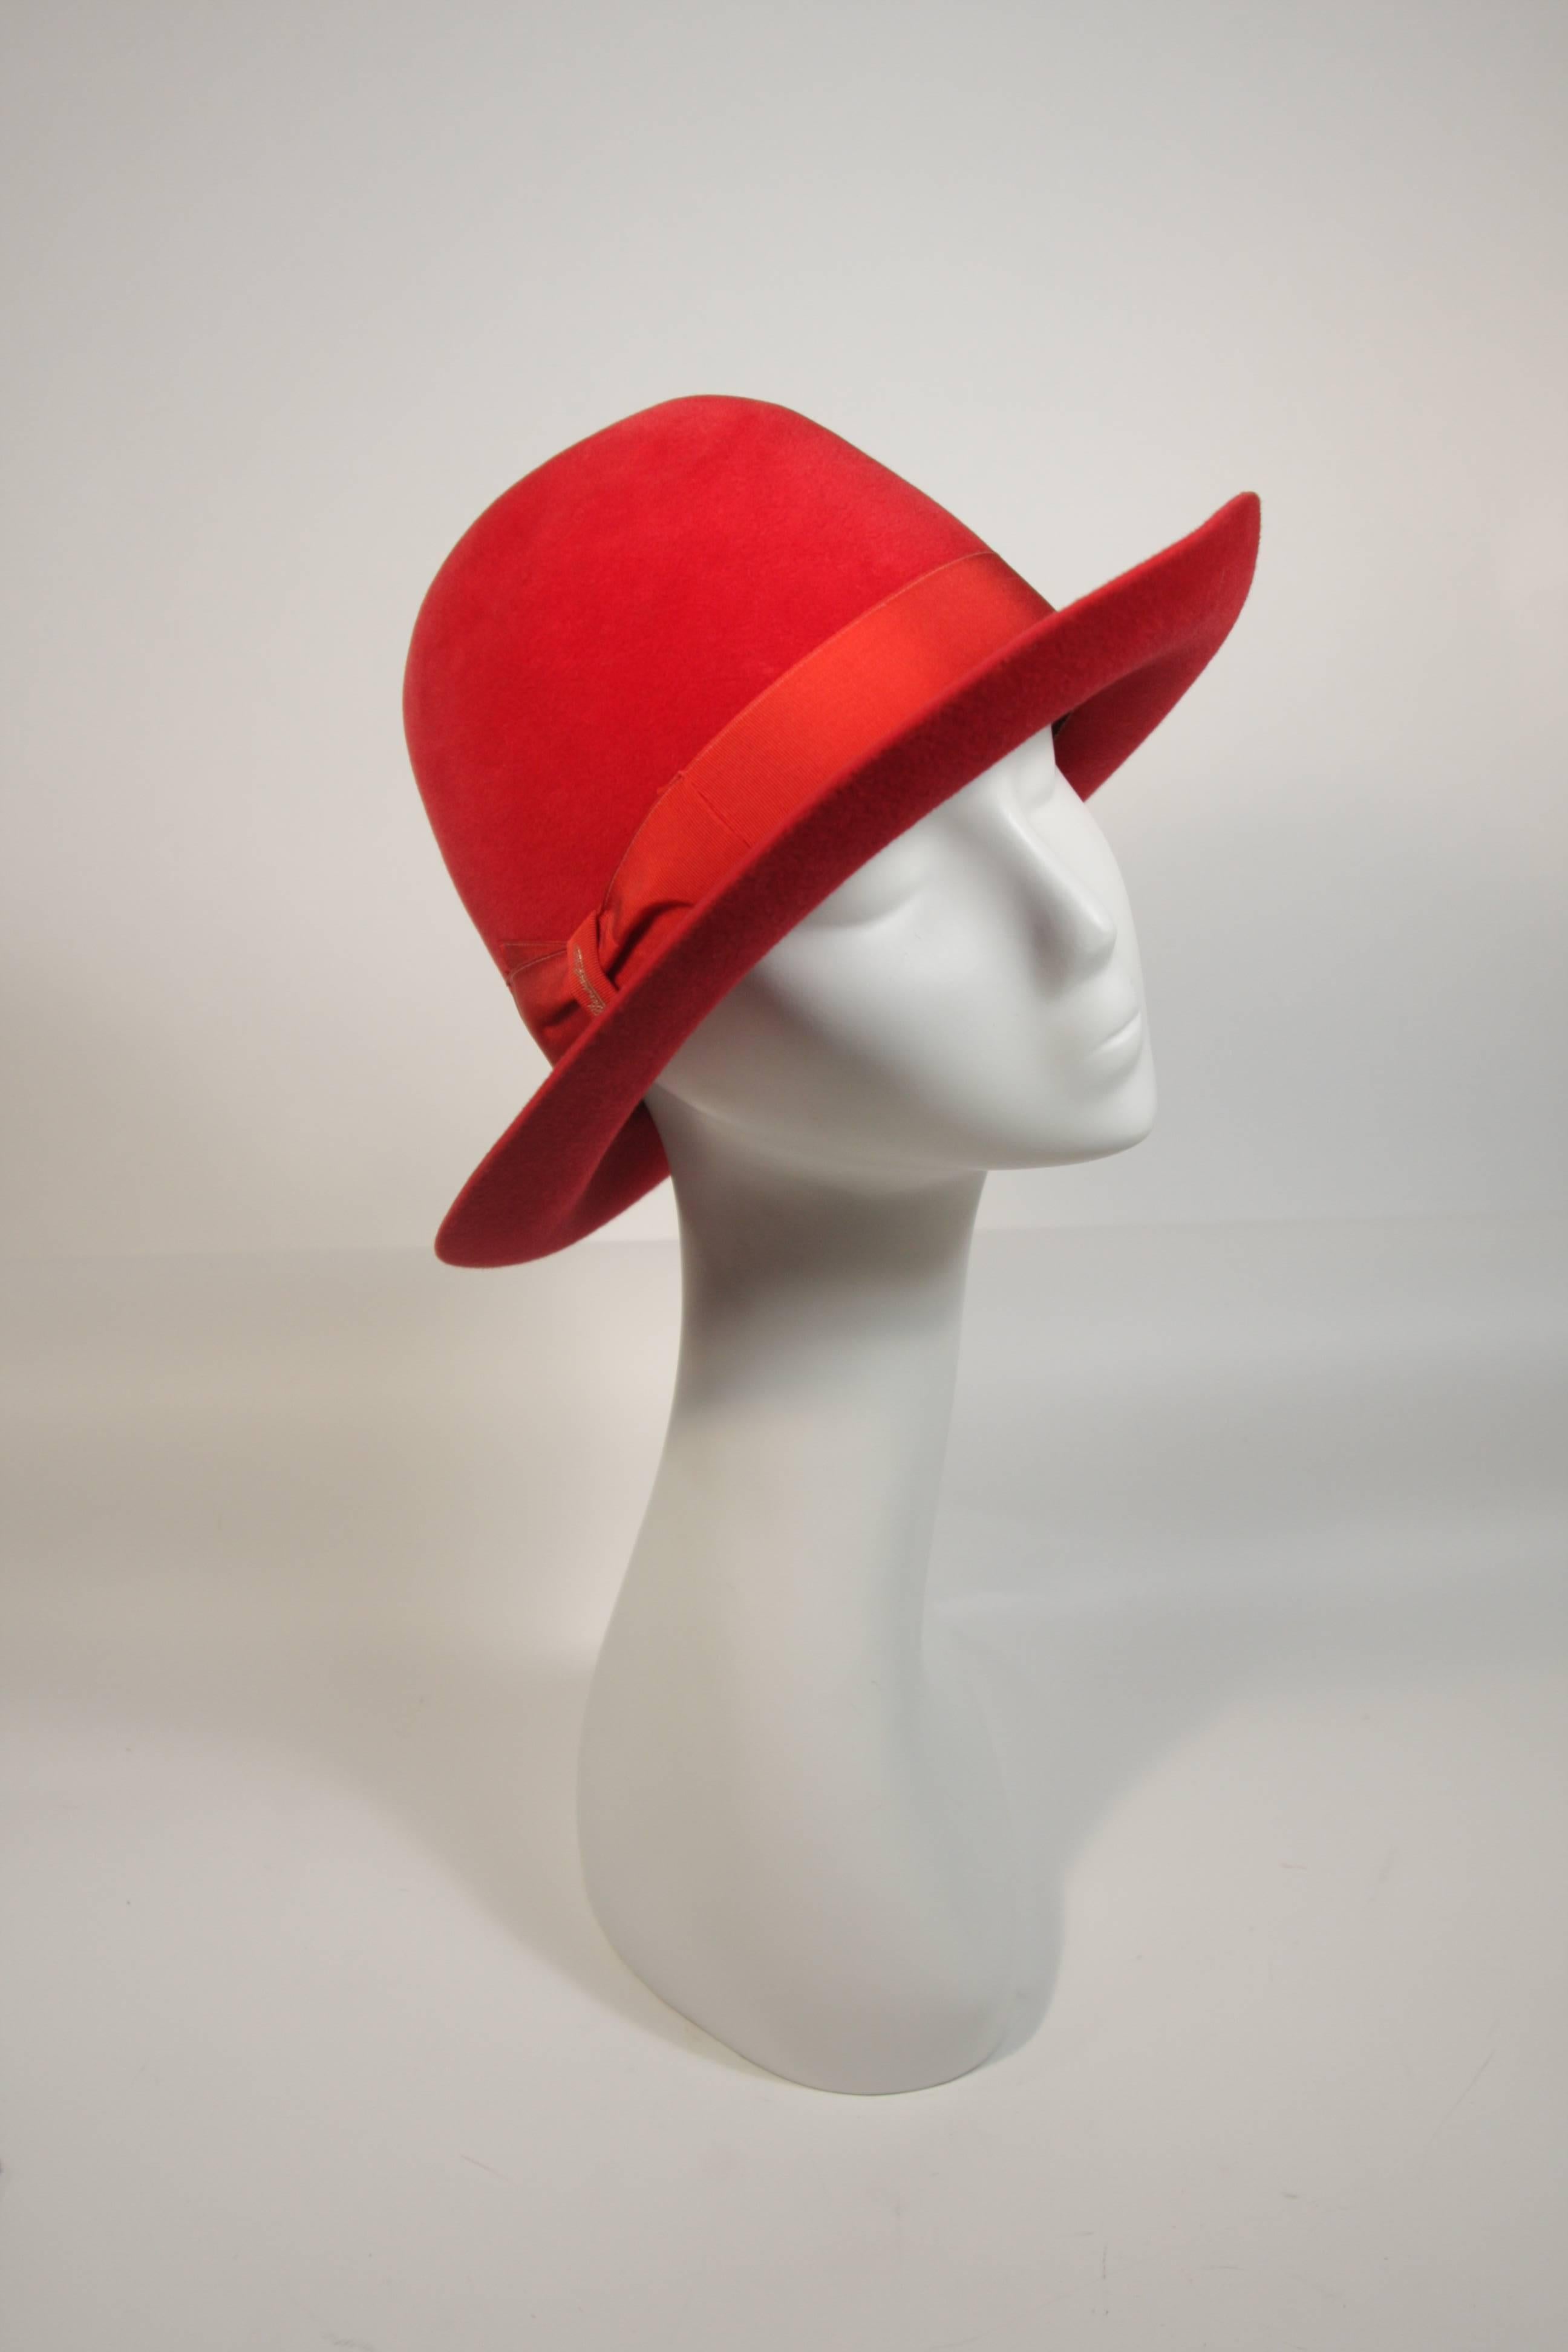 This Borsalino Italy hat is composed of a red felt and features a ribbon around the brim. In great vintage condition. A very chic design. Size 6 3/4. Made in Italy. 

**Please cross-reference measurements for personal accuracy. The size listed in